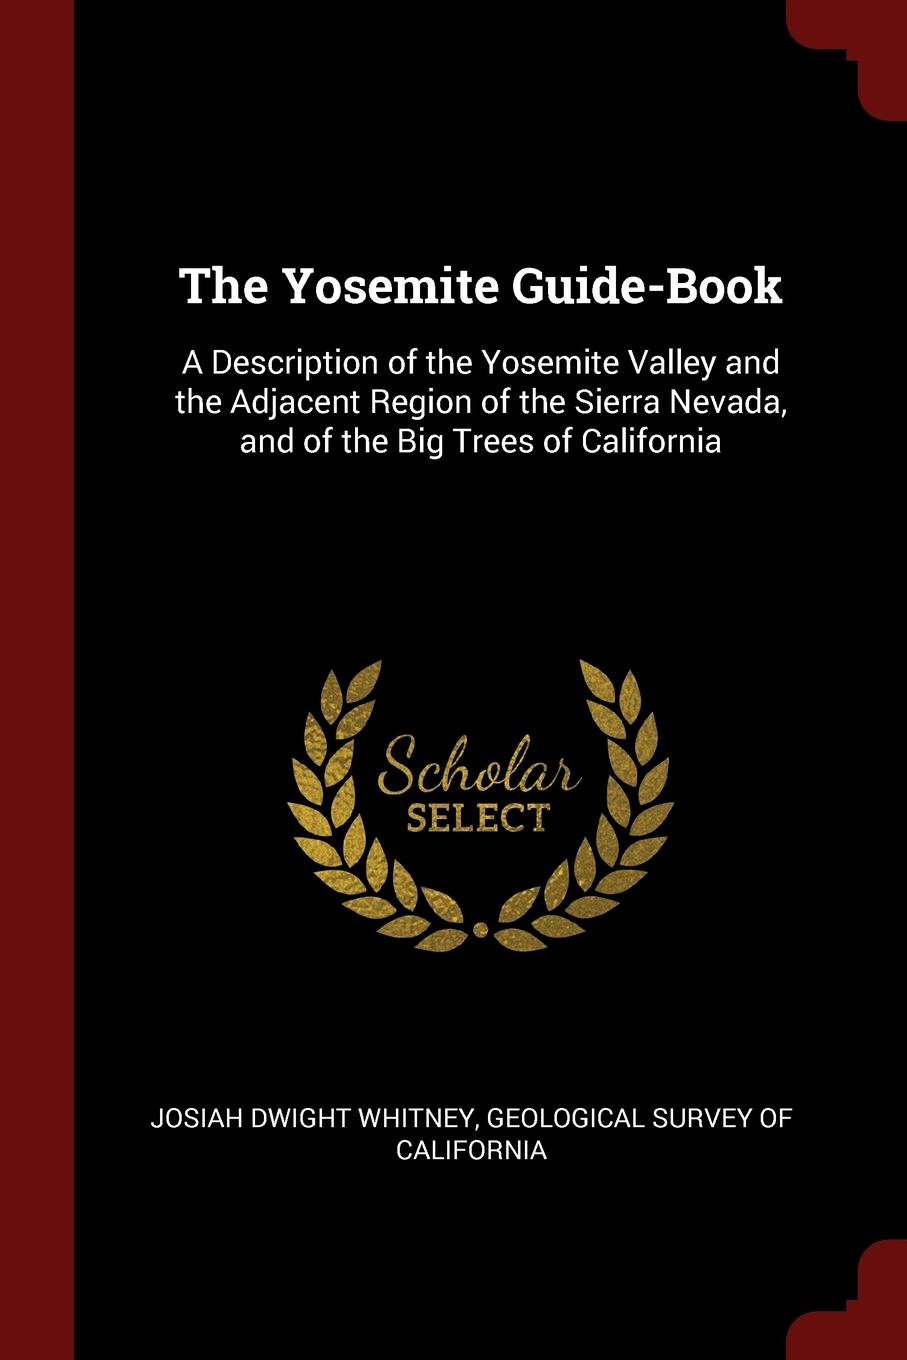 The Yosemite Guide-Book. A Description of the Yosemite Valley and the Adjacent Region of the Sierra Nevada, and of the Big Trees of California